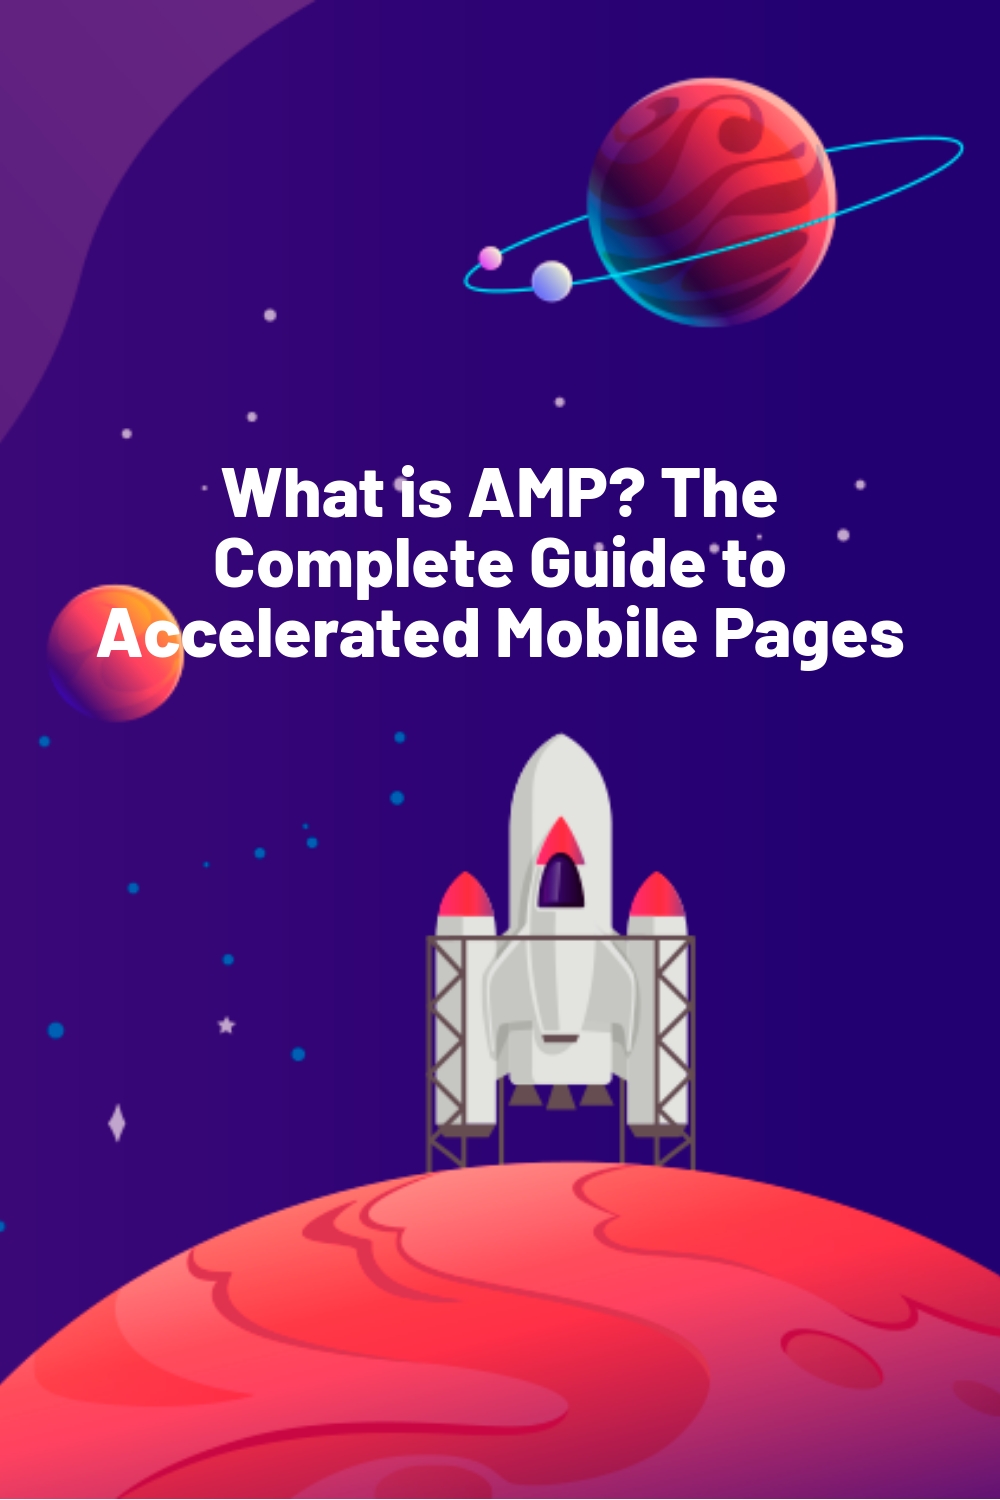 What is AMP? The Complete Guide to Accelerated Mobile Pages